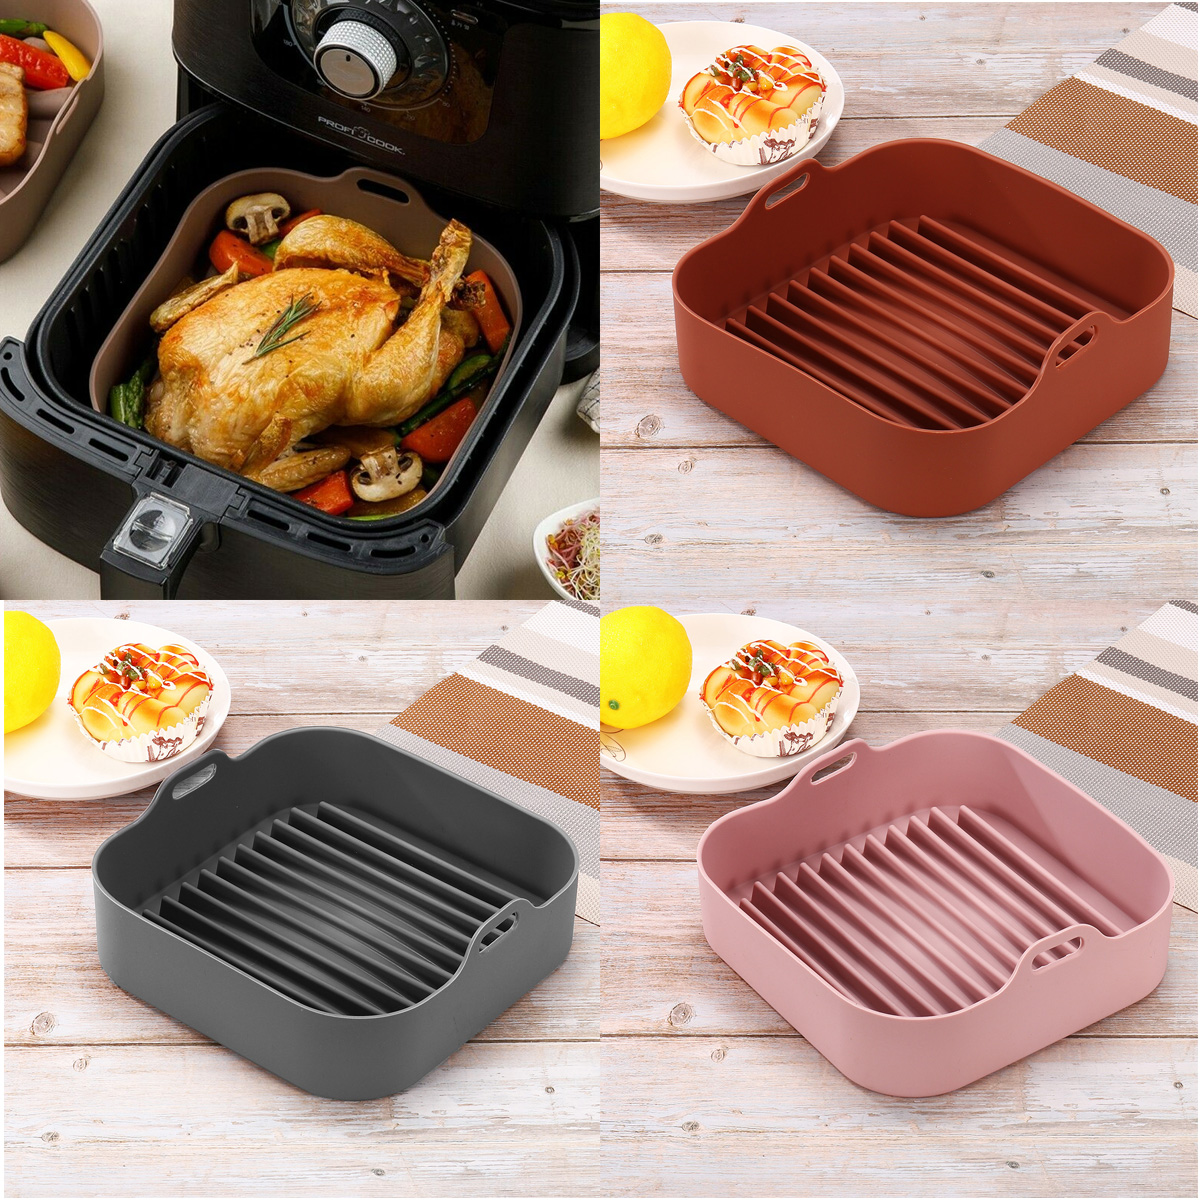 Multifunctional-Silicone-Baking-Tray-High-Temperature-Resistant-Non-stick-Bread-Fried-Baking-Pan-wit-1864776-2